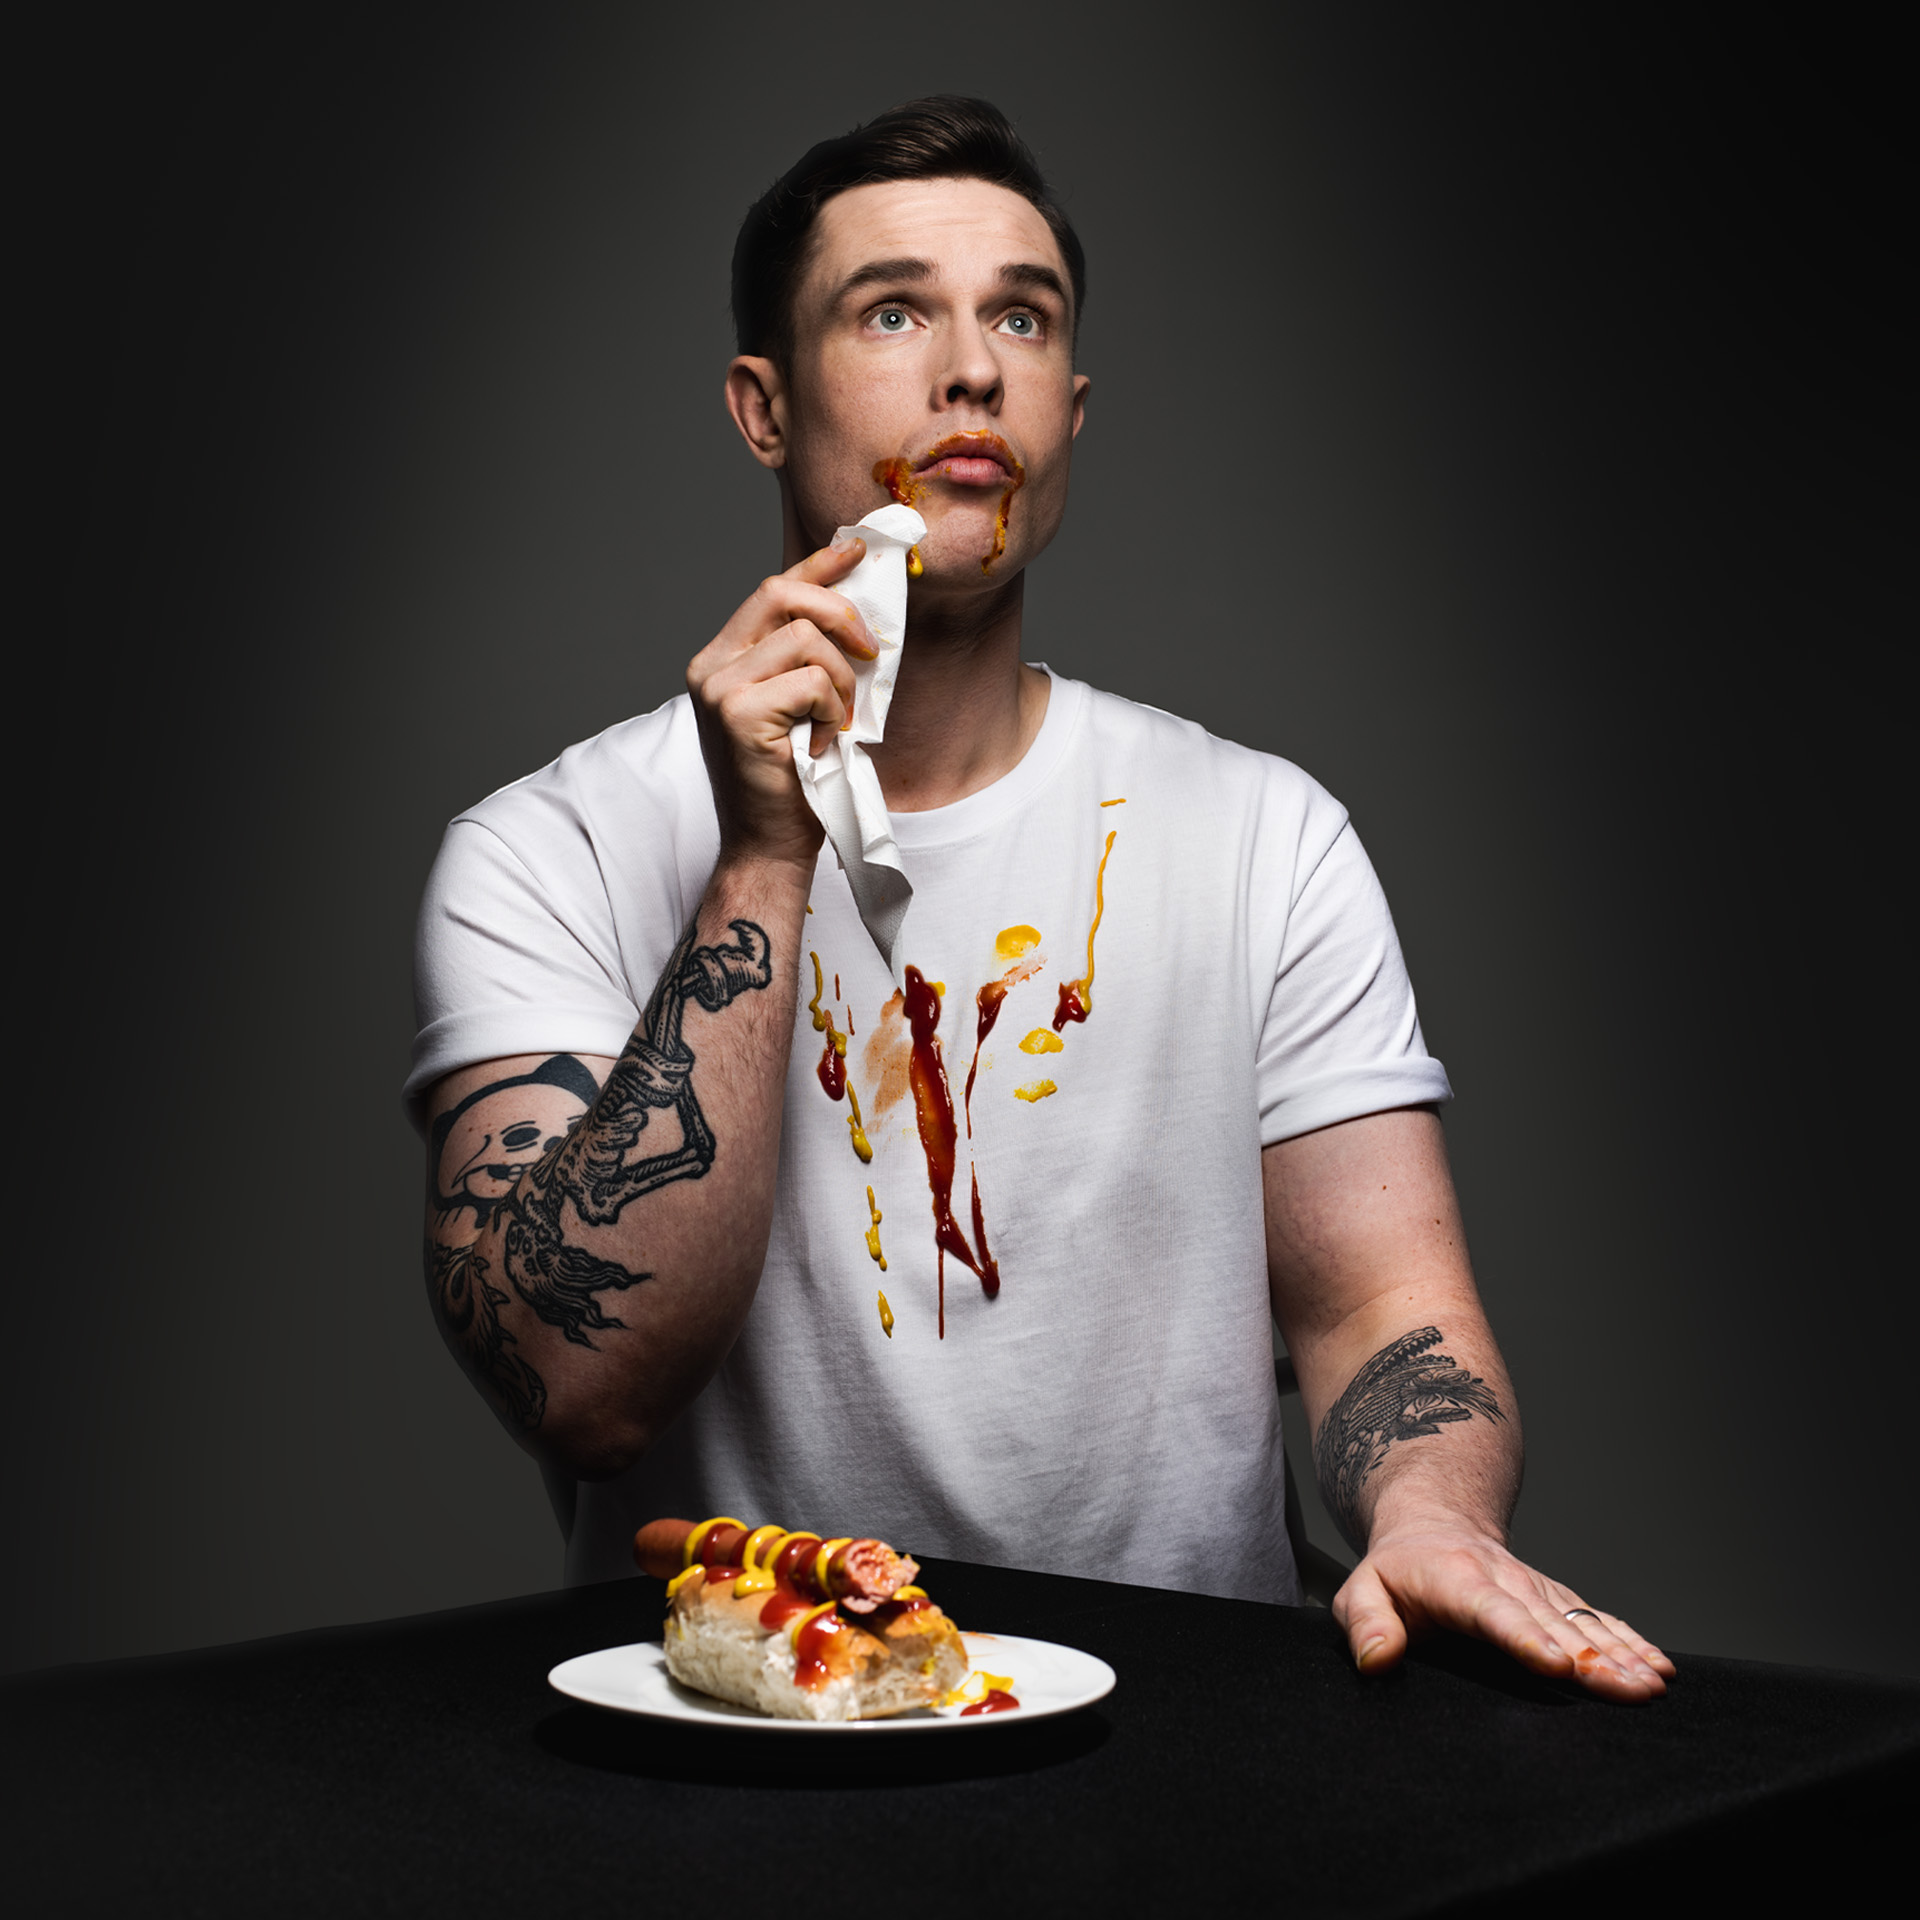 Picture of Ed Gamble with a hot dog on a plate in front of him, dabbing the corner of his mouth with a napkin with sauce spilt all down the front of his white t shirt